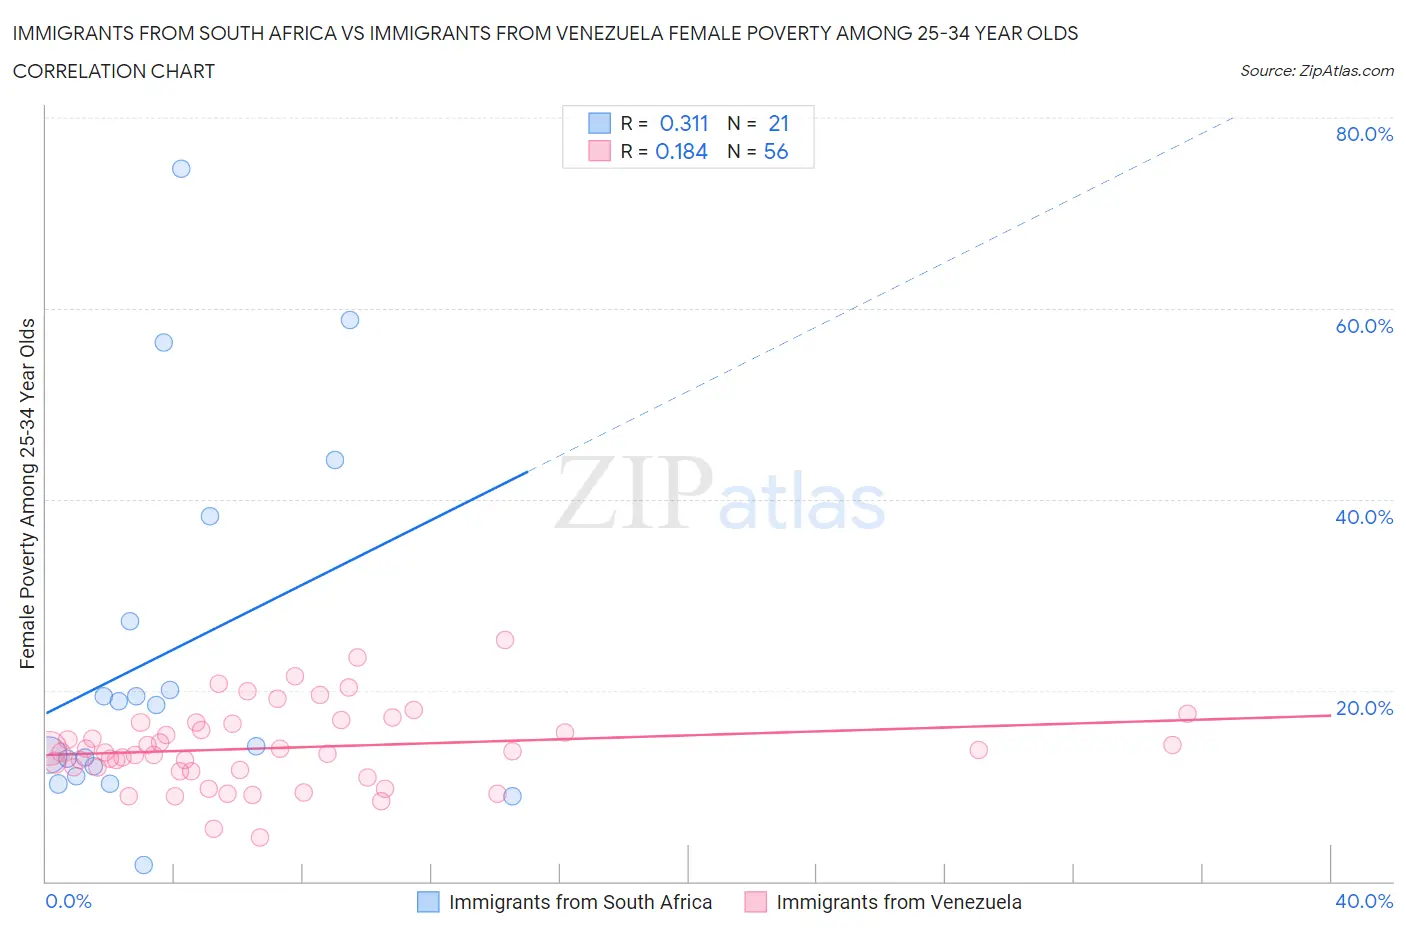 Immigrants from South Africa vs Immigrants from Venezuela Female Poverty Among 25-34 Year Olds